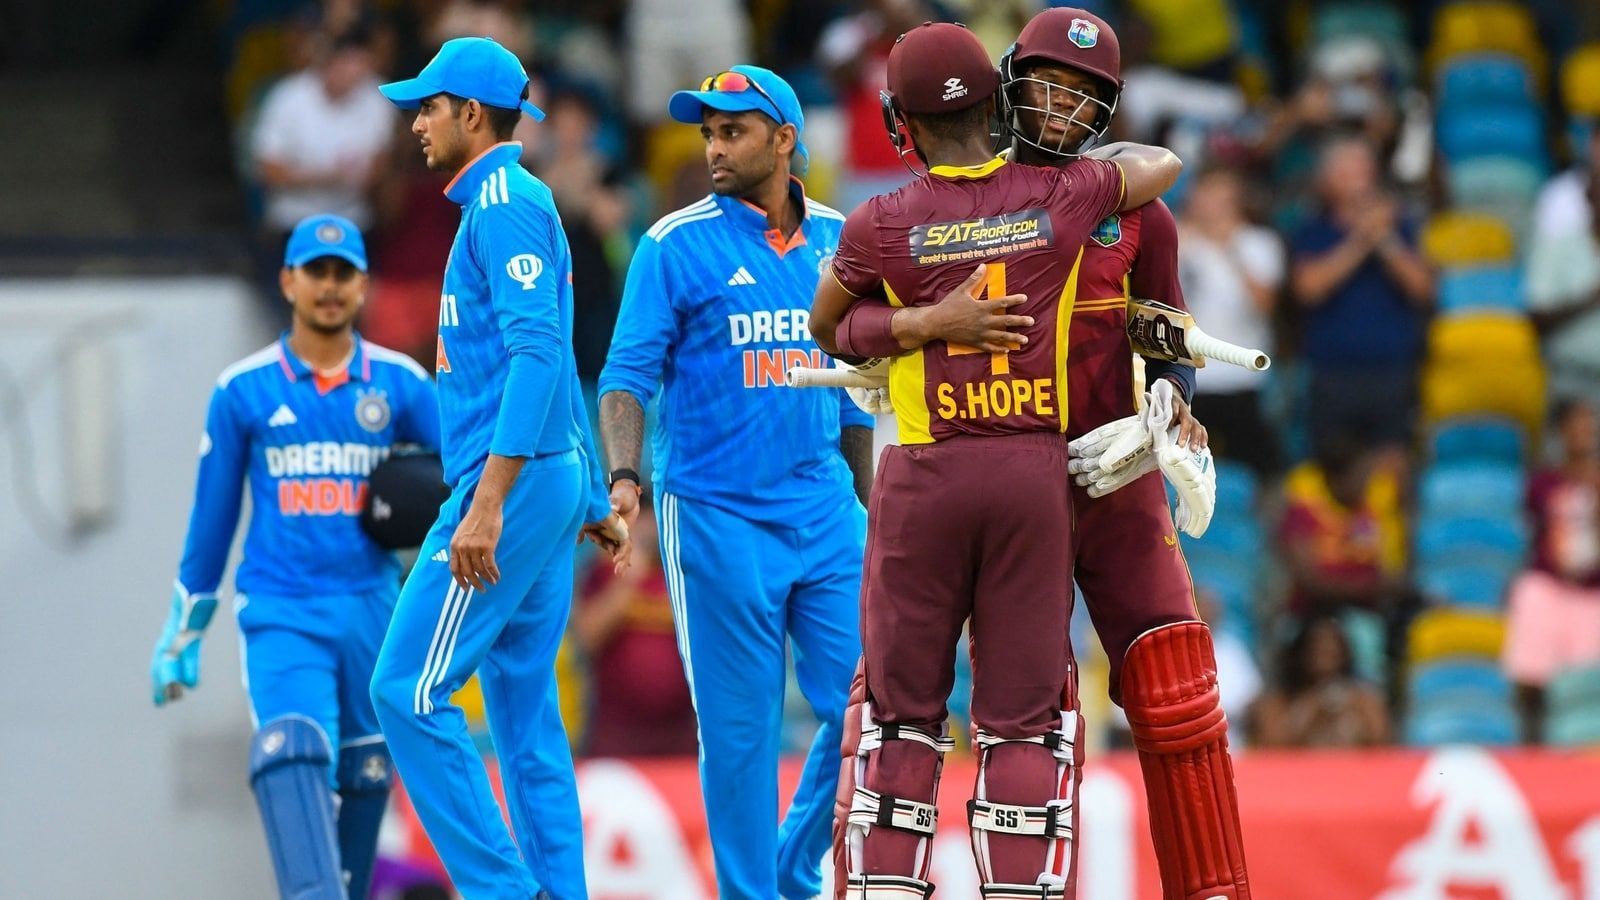 India lost the 2nd ODI against West Indies in Barbados